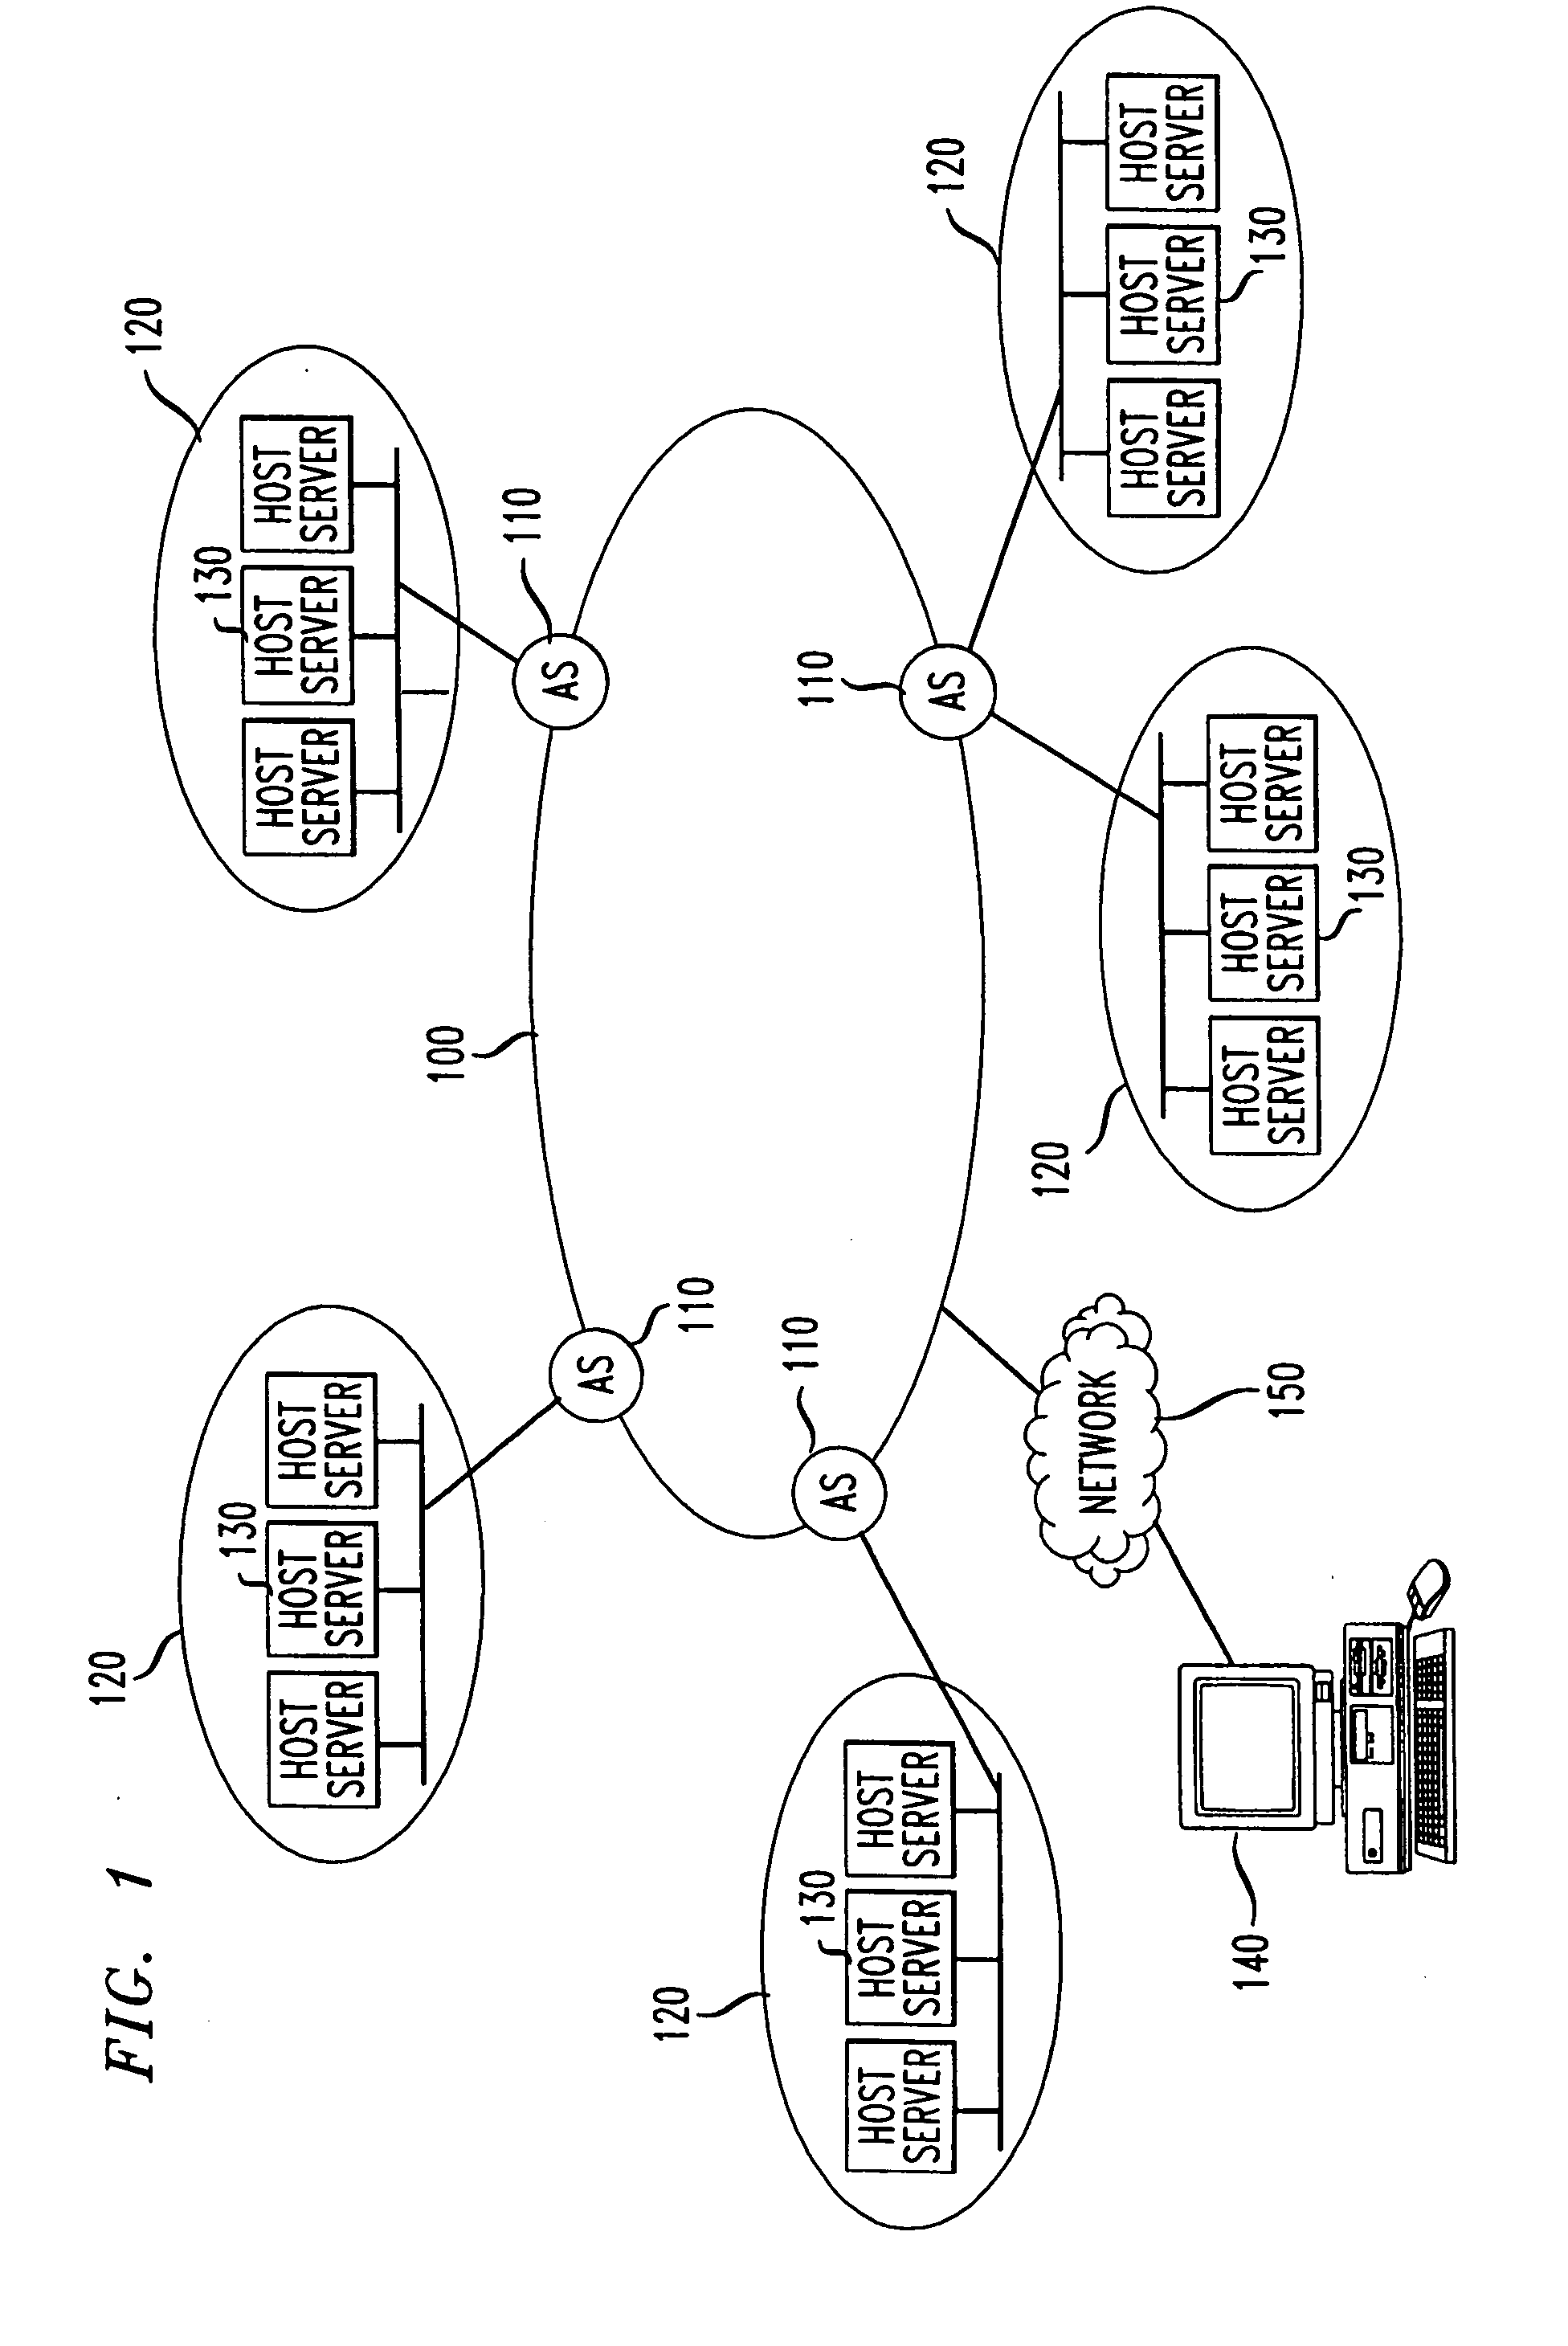 System, method and apparatus for network service load and reliability management